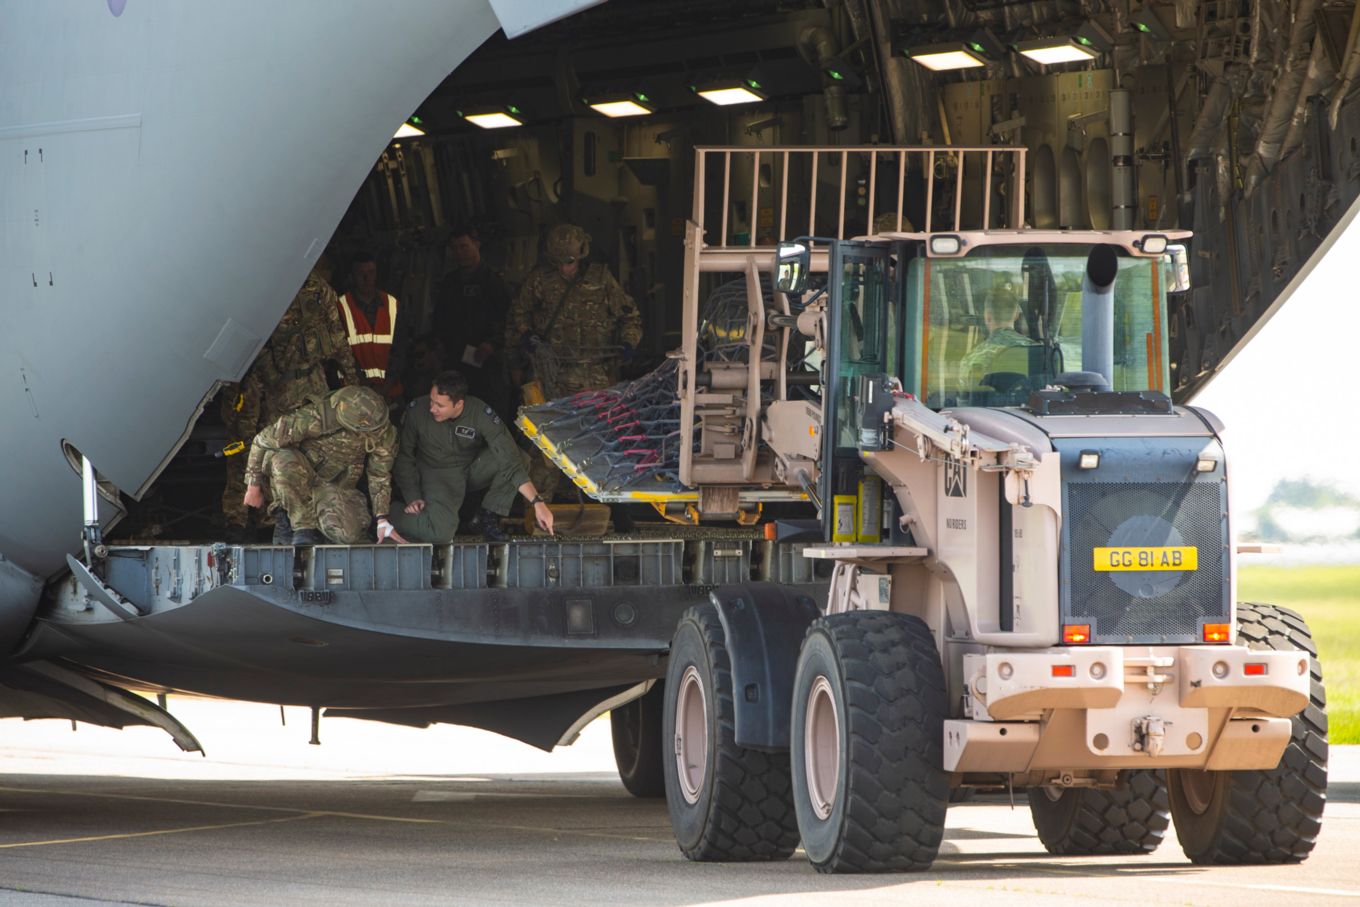 Personnel are trained in the loading of aircraft